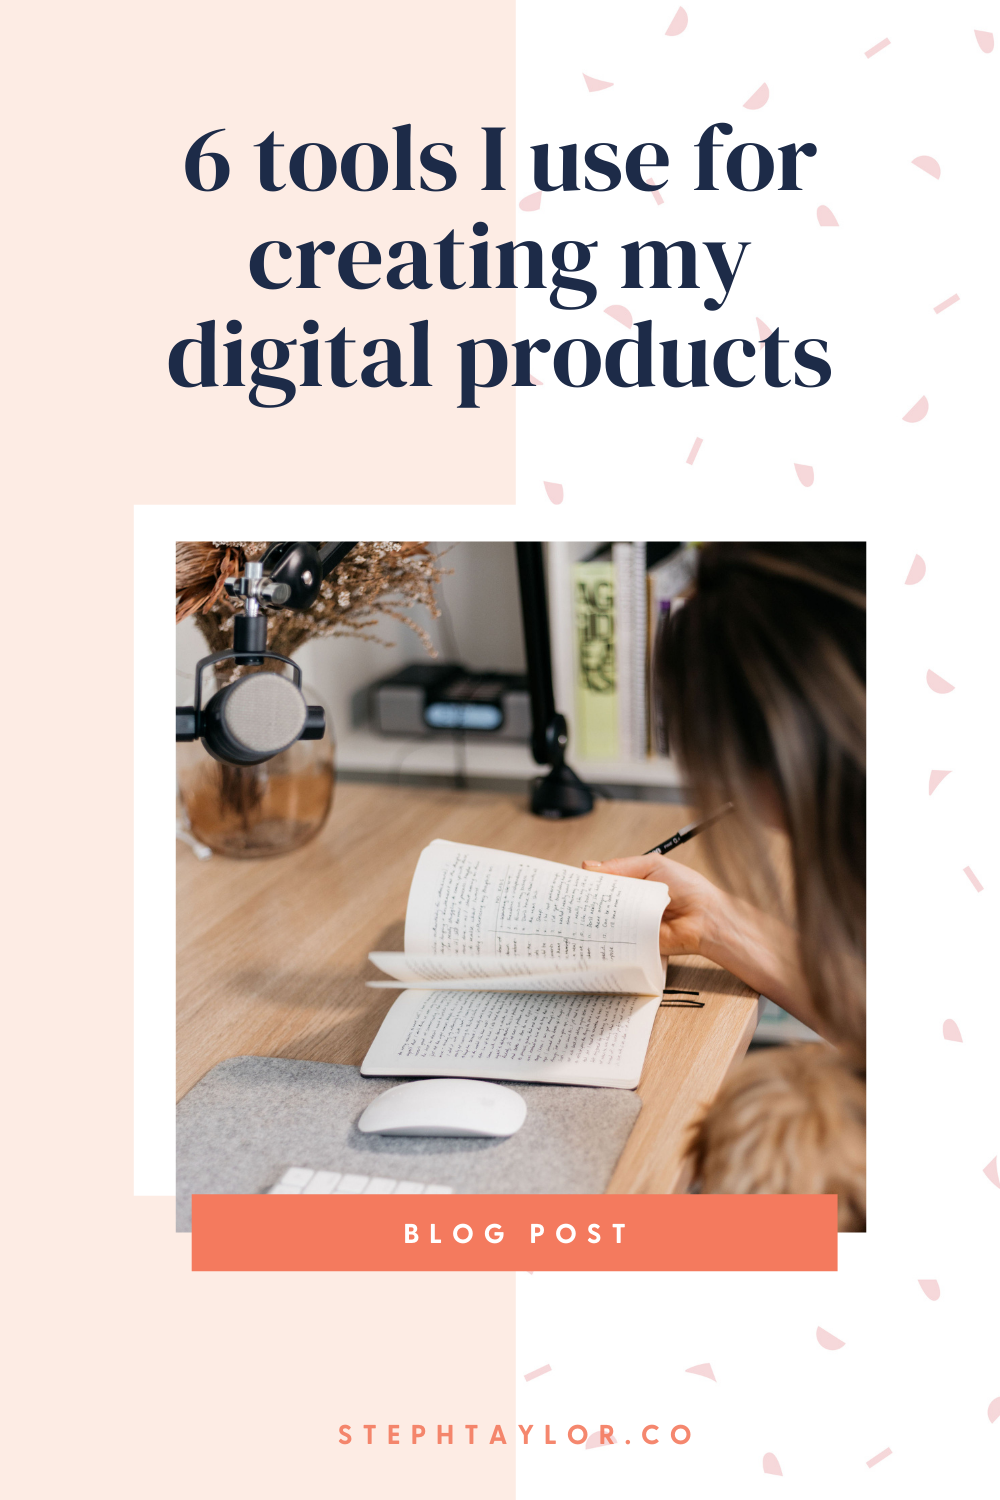 6 tools I use for creating my digital products